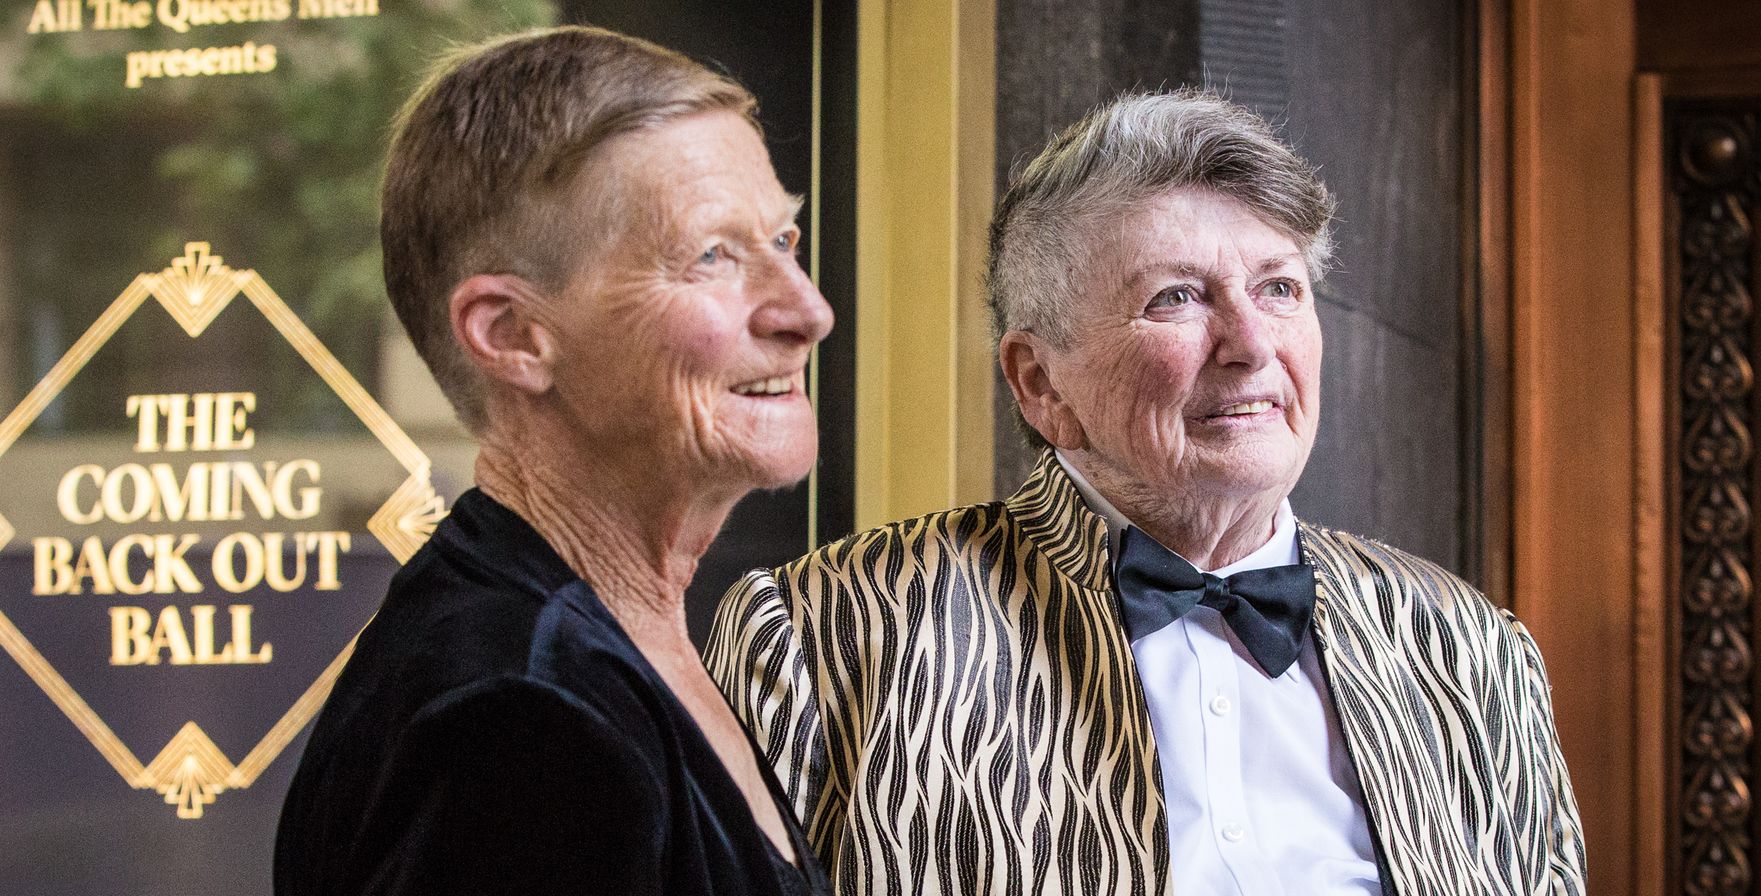 ‘We’re still here, and we’re staying here’: Coming Back Out Ball champions LGBTI elders